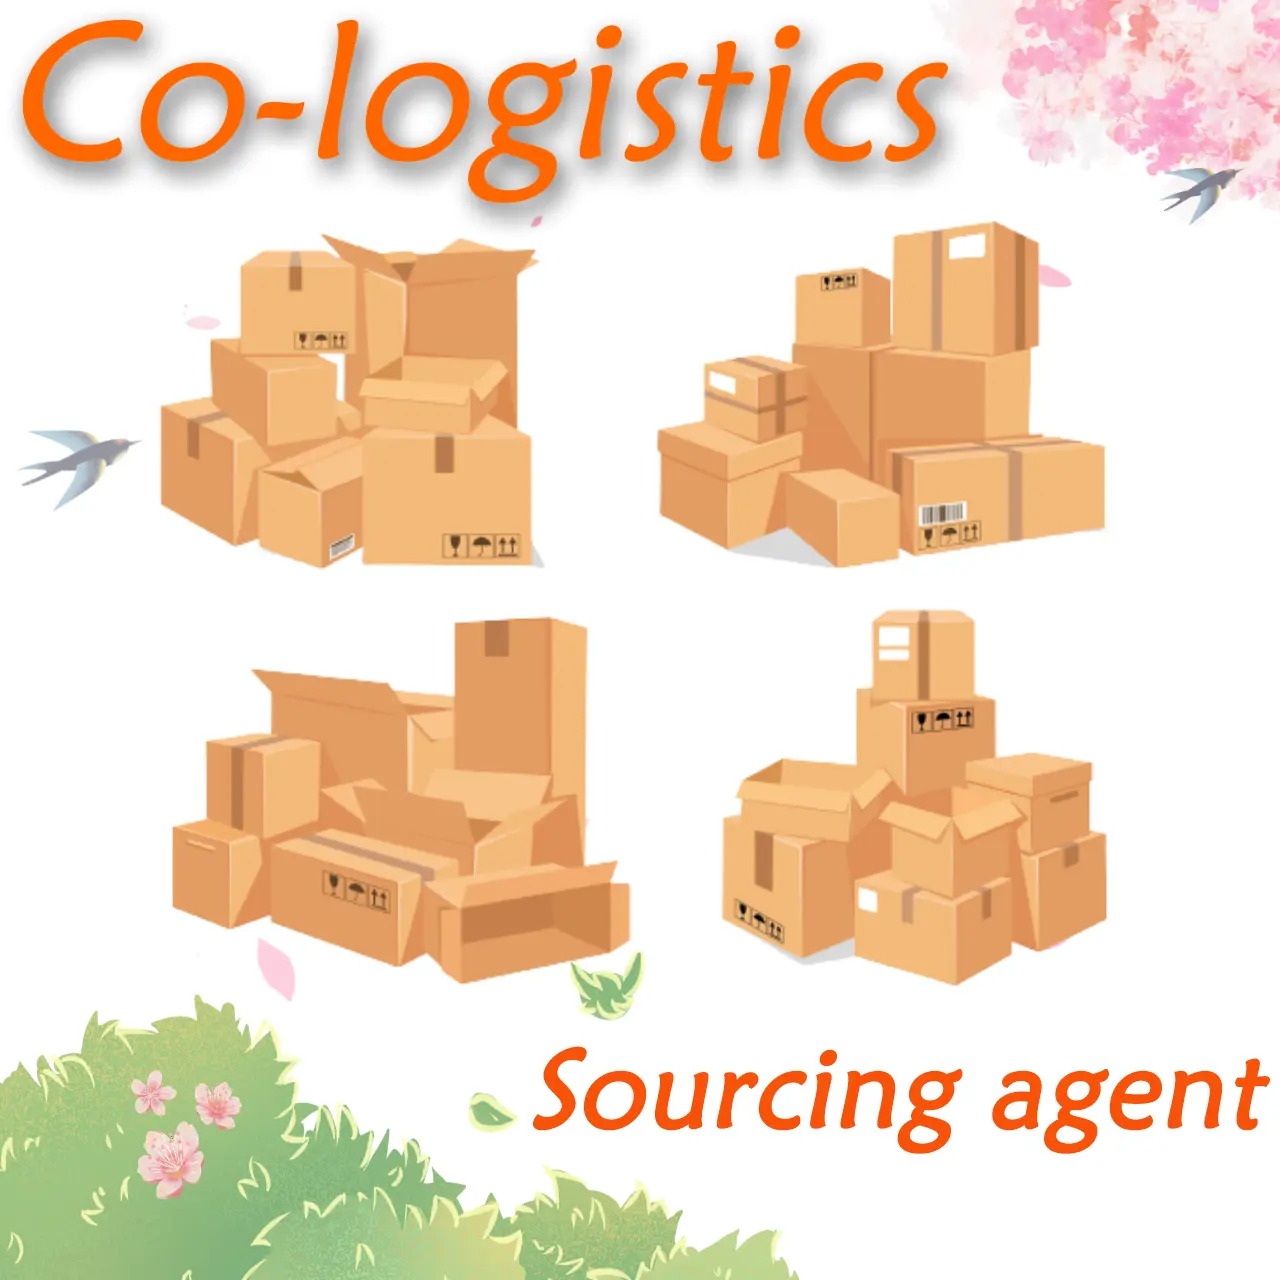 China local market sourcing agent with good price to your door